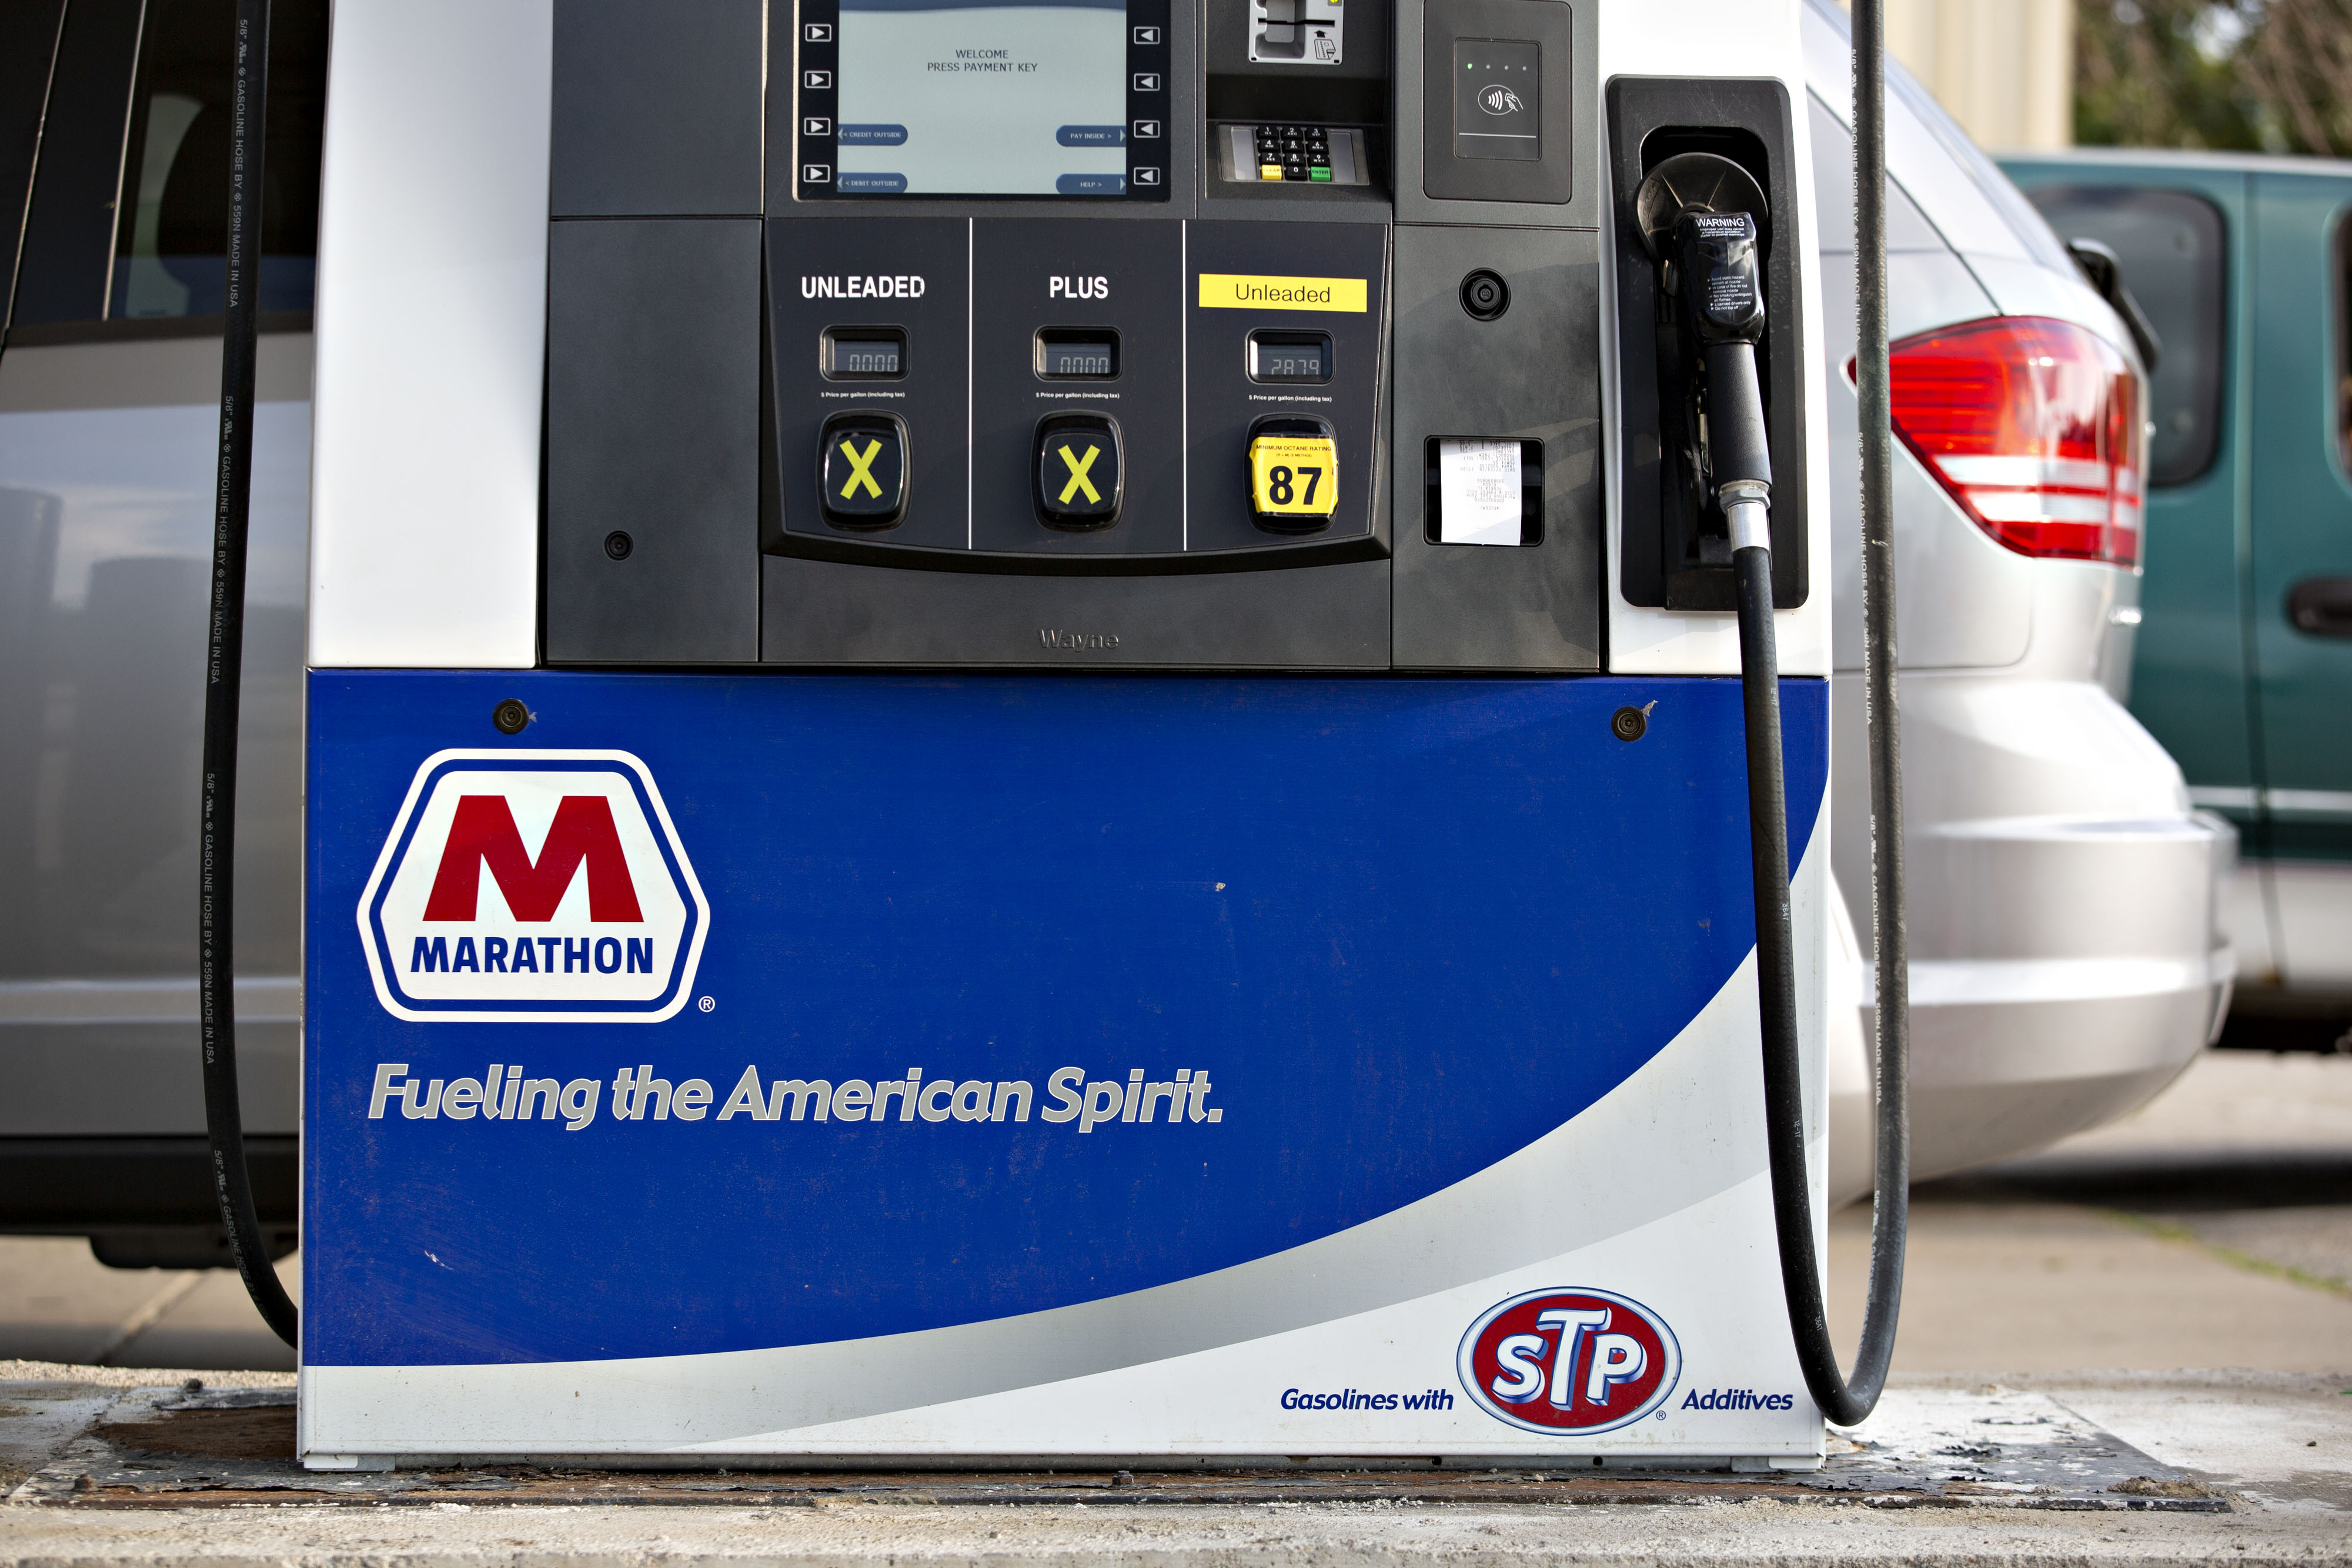 marathon-weighs-selling-high-ethanol-gas-in-minnesota-governors-biofuels-coalition